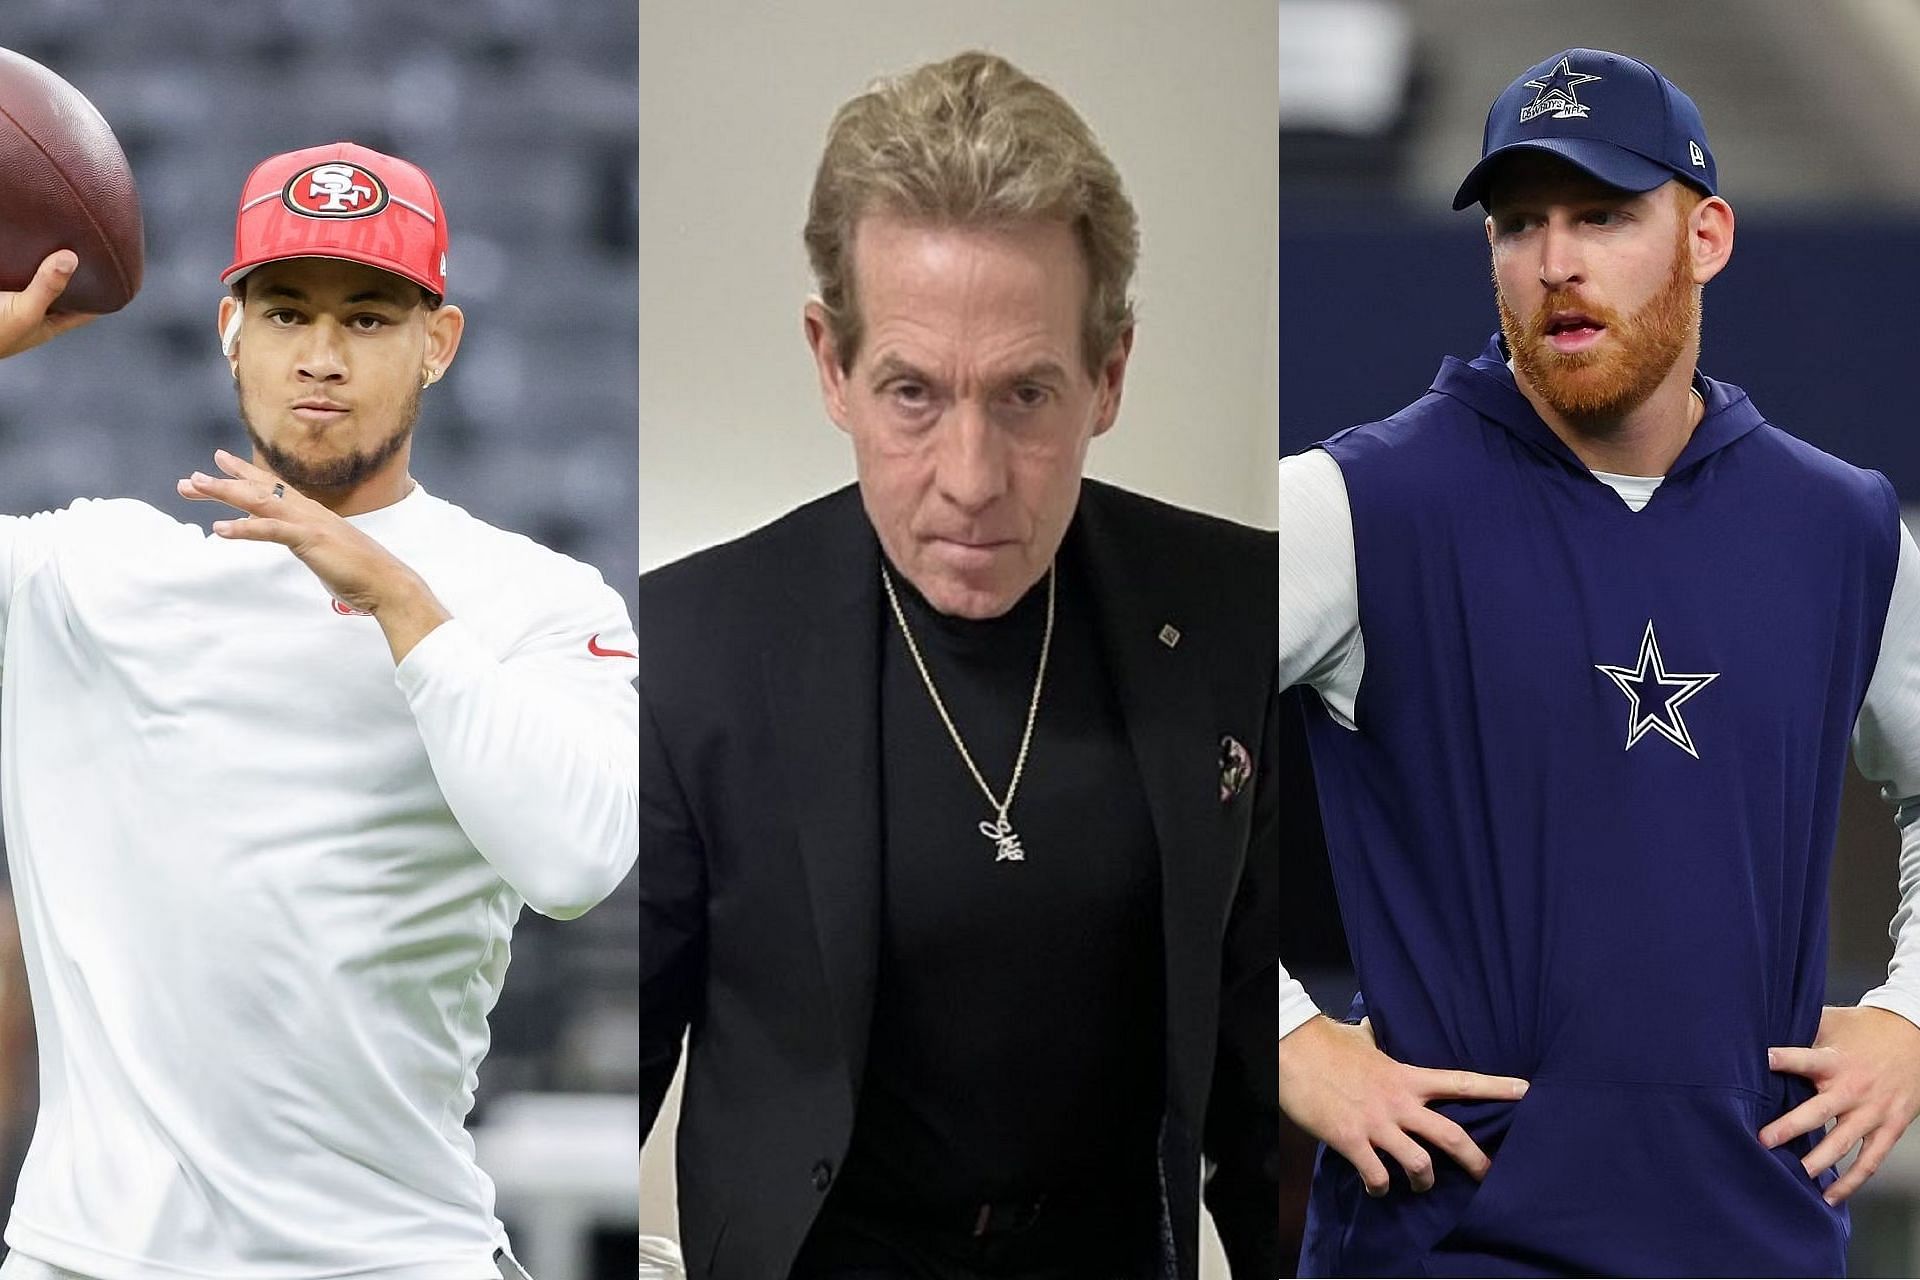 Skip Bayless raises concerns over Cowboys decision to trade for Trey Lance despite having Cooper Rush (Pic Credits: X@RealSkipBayless and Getty)